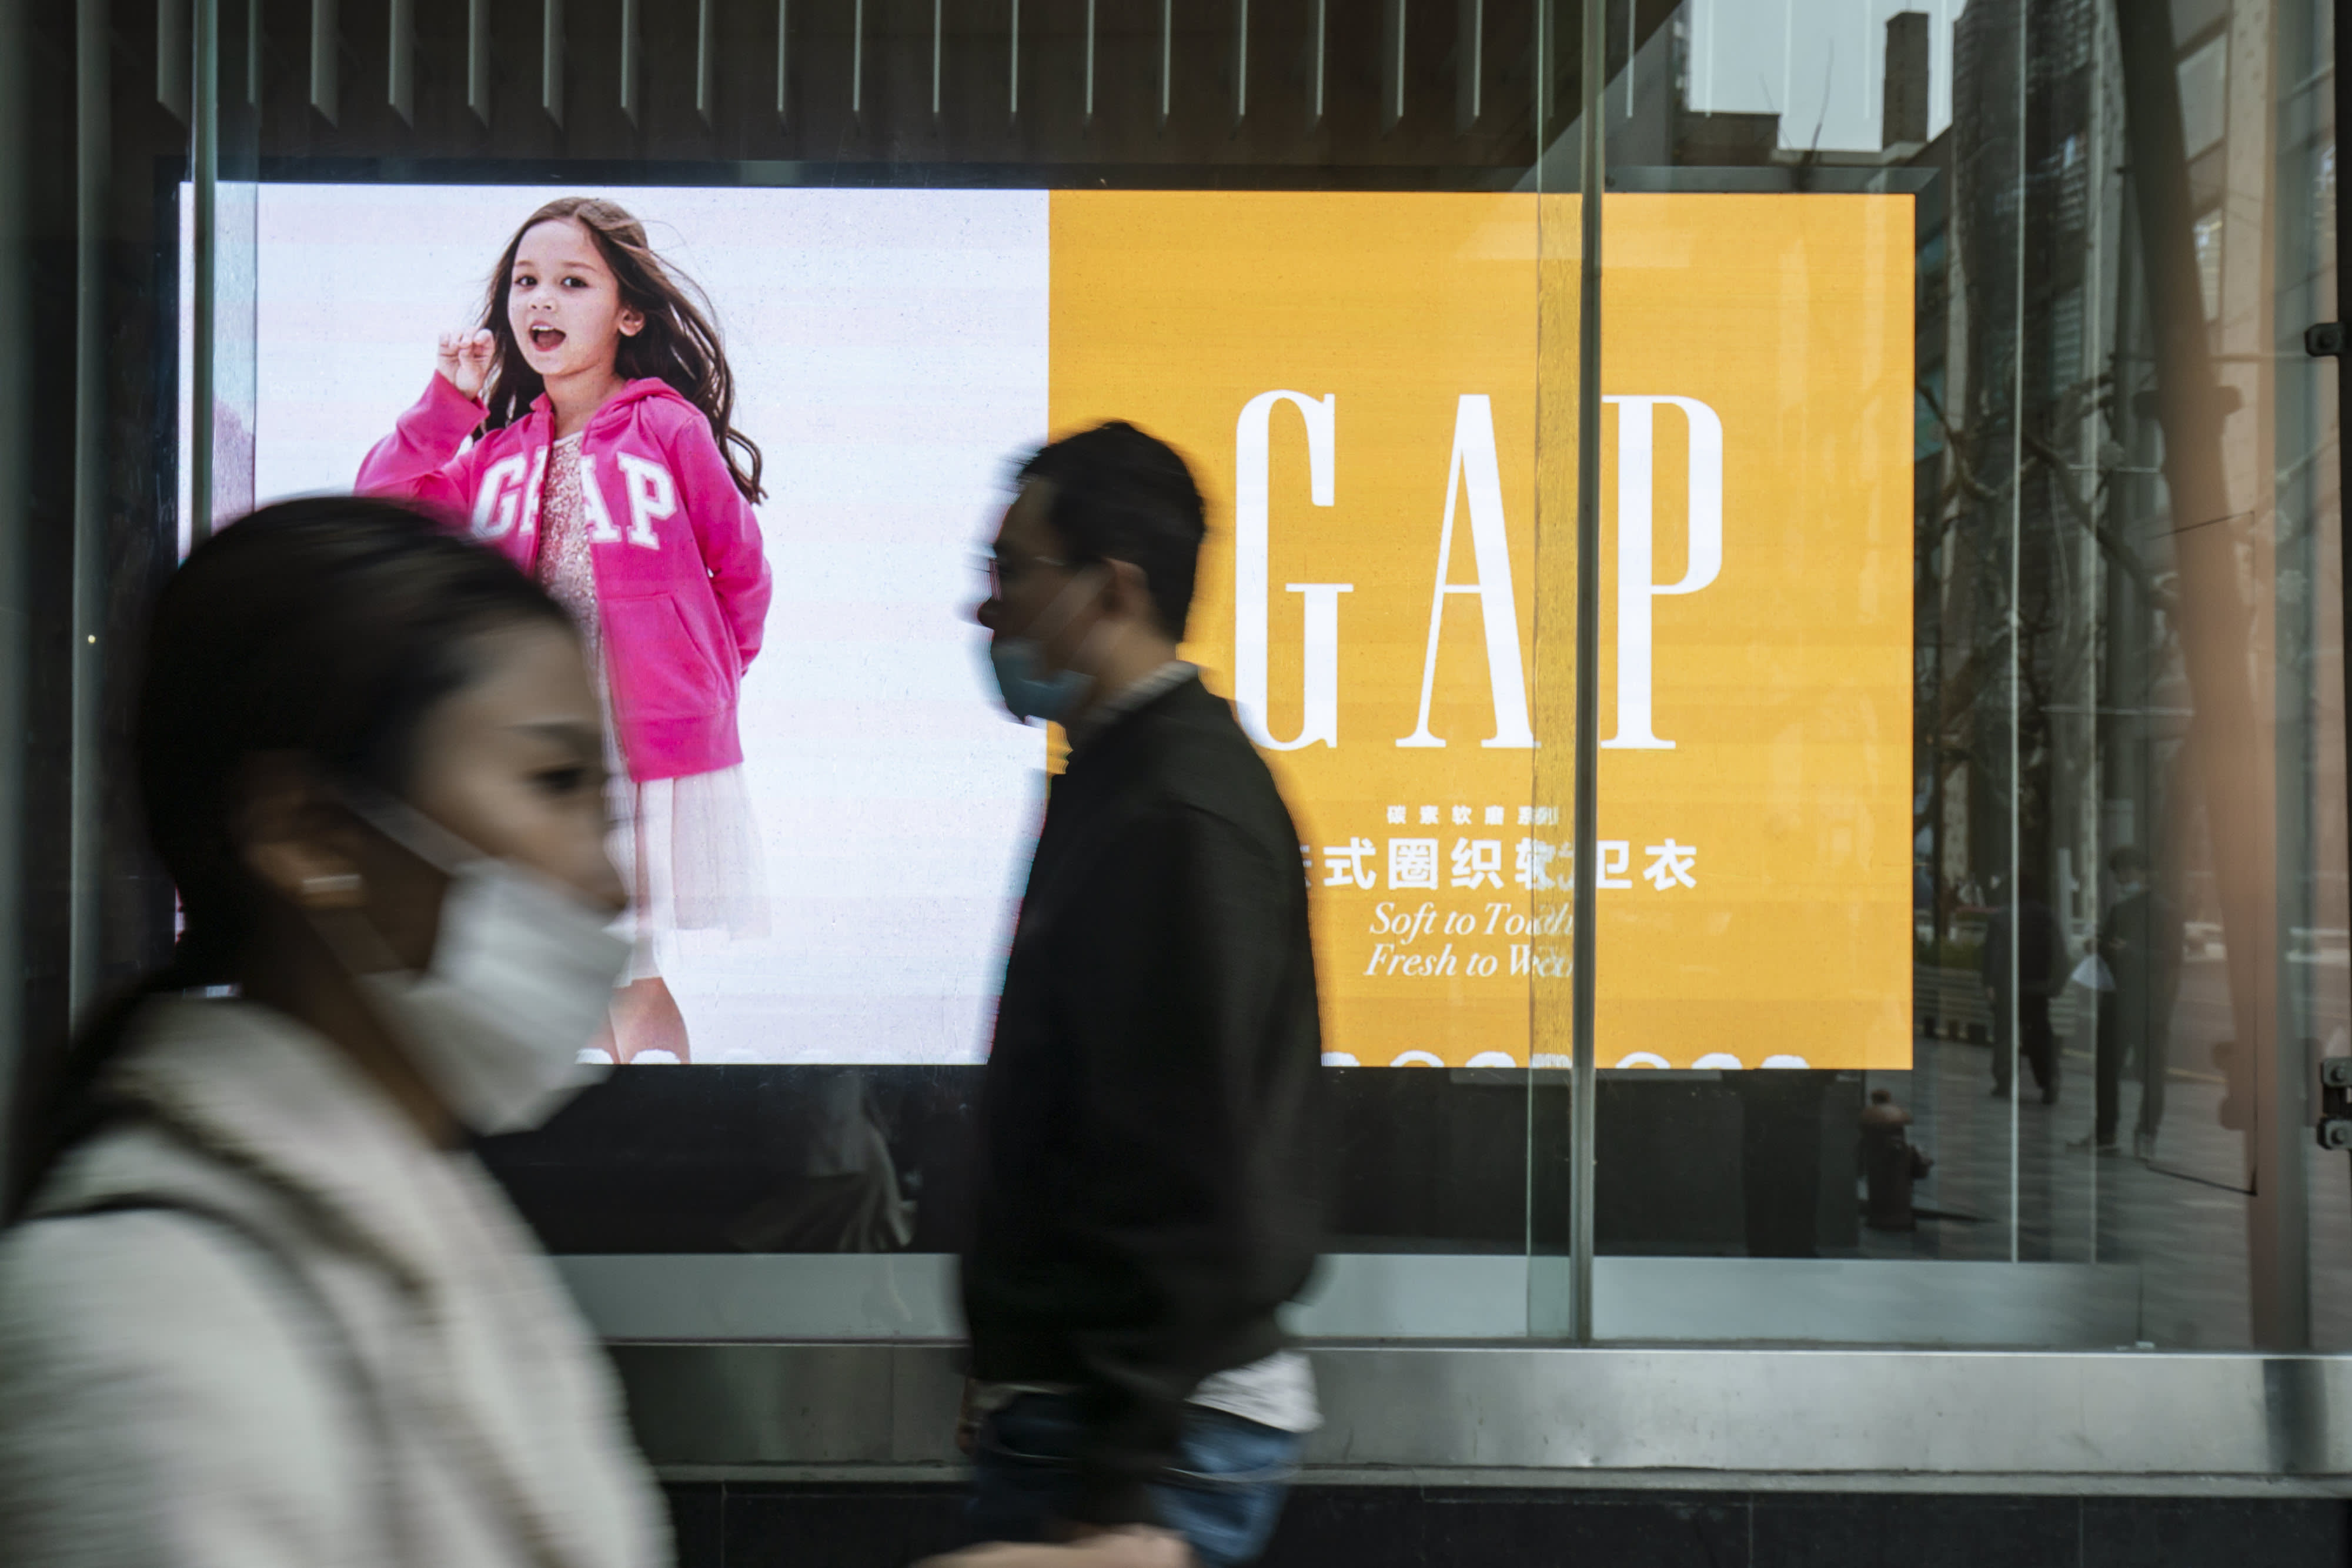 Goldman Sachs upgrades Gap, says stock can rally nearly 30% despite challenges facing retailers